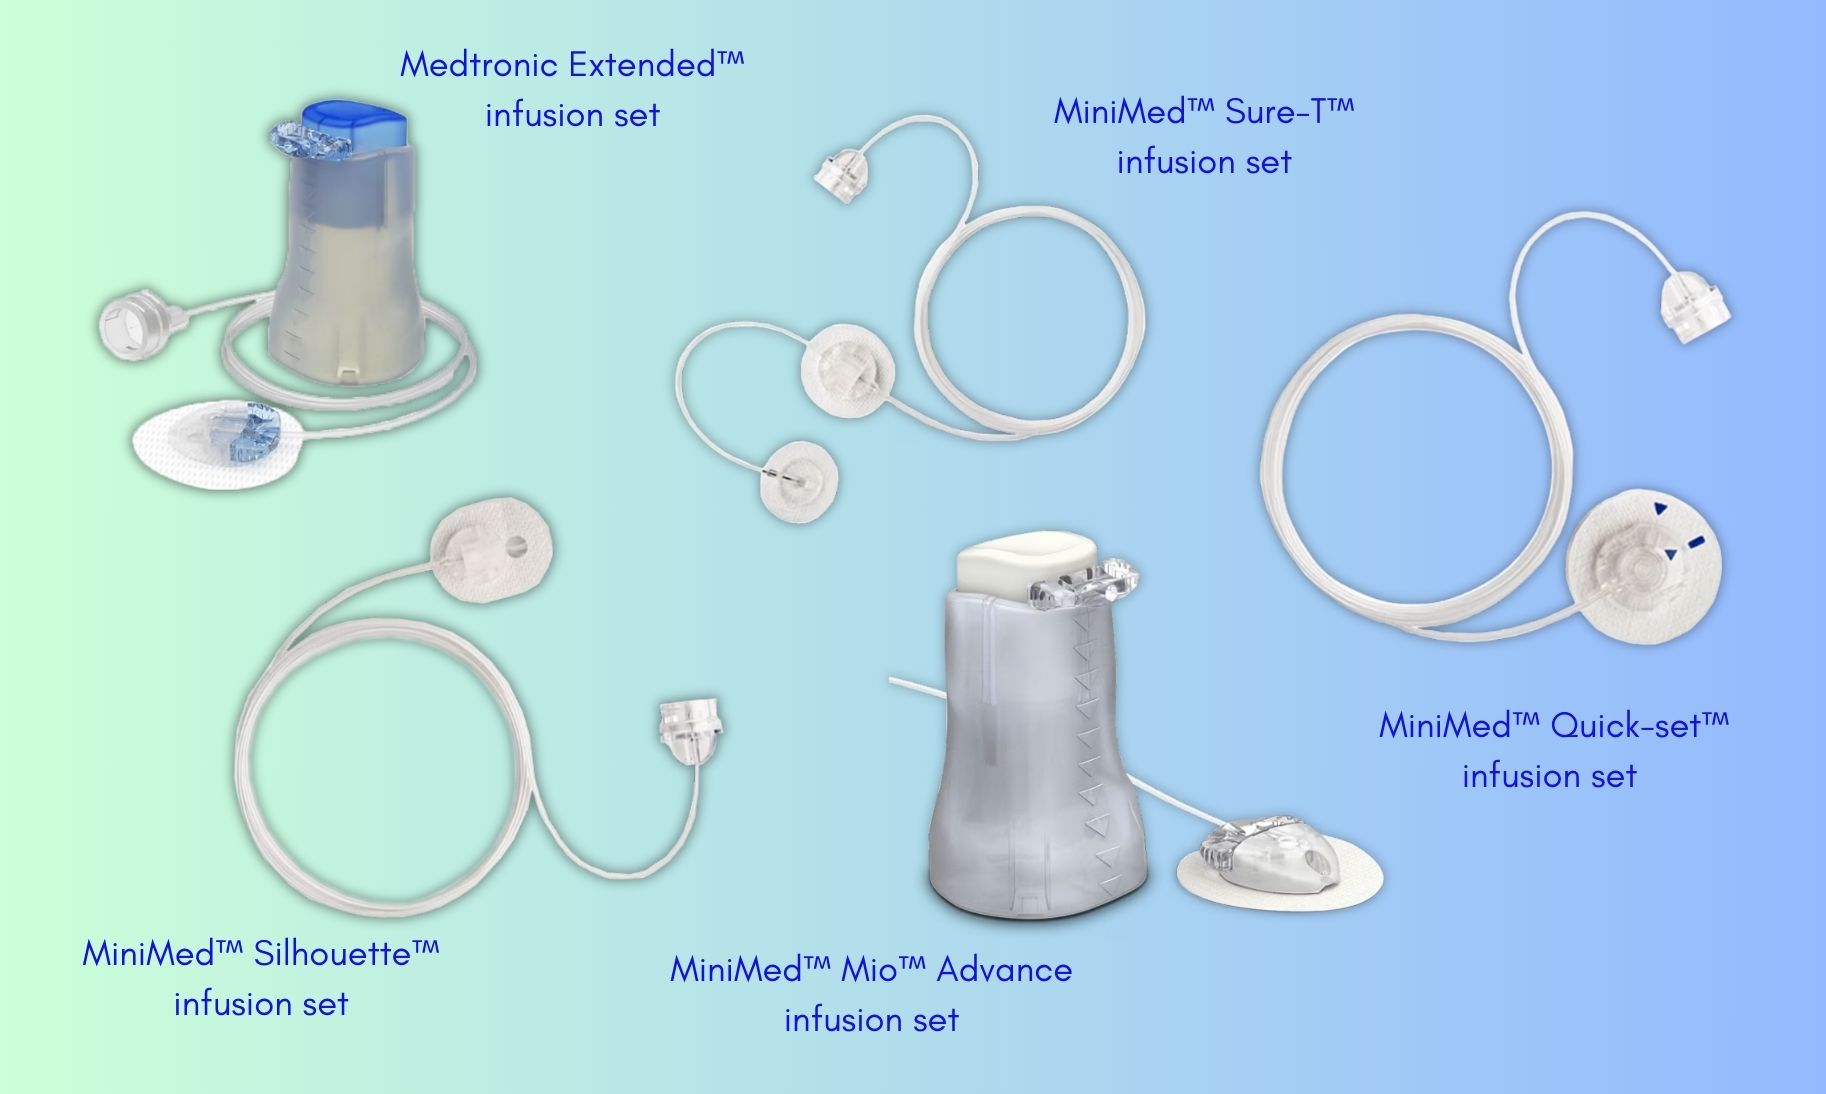 Medtronic infusion sets